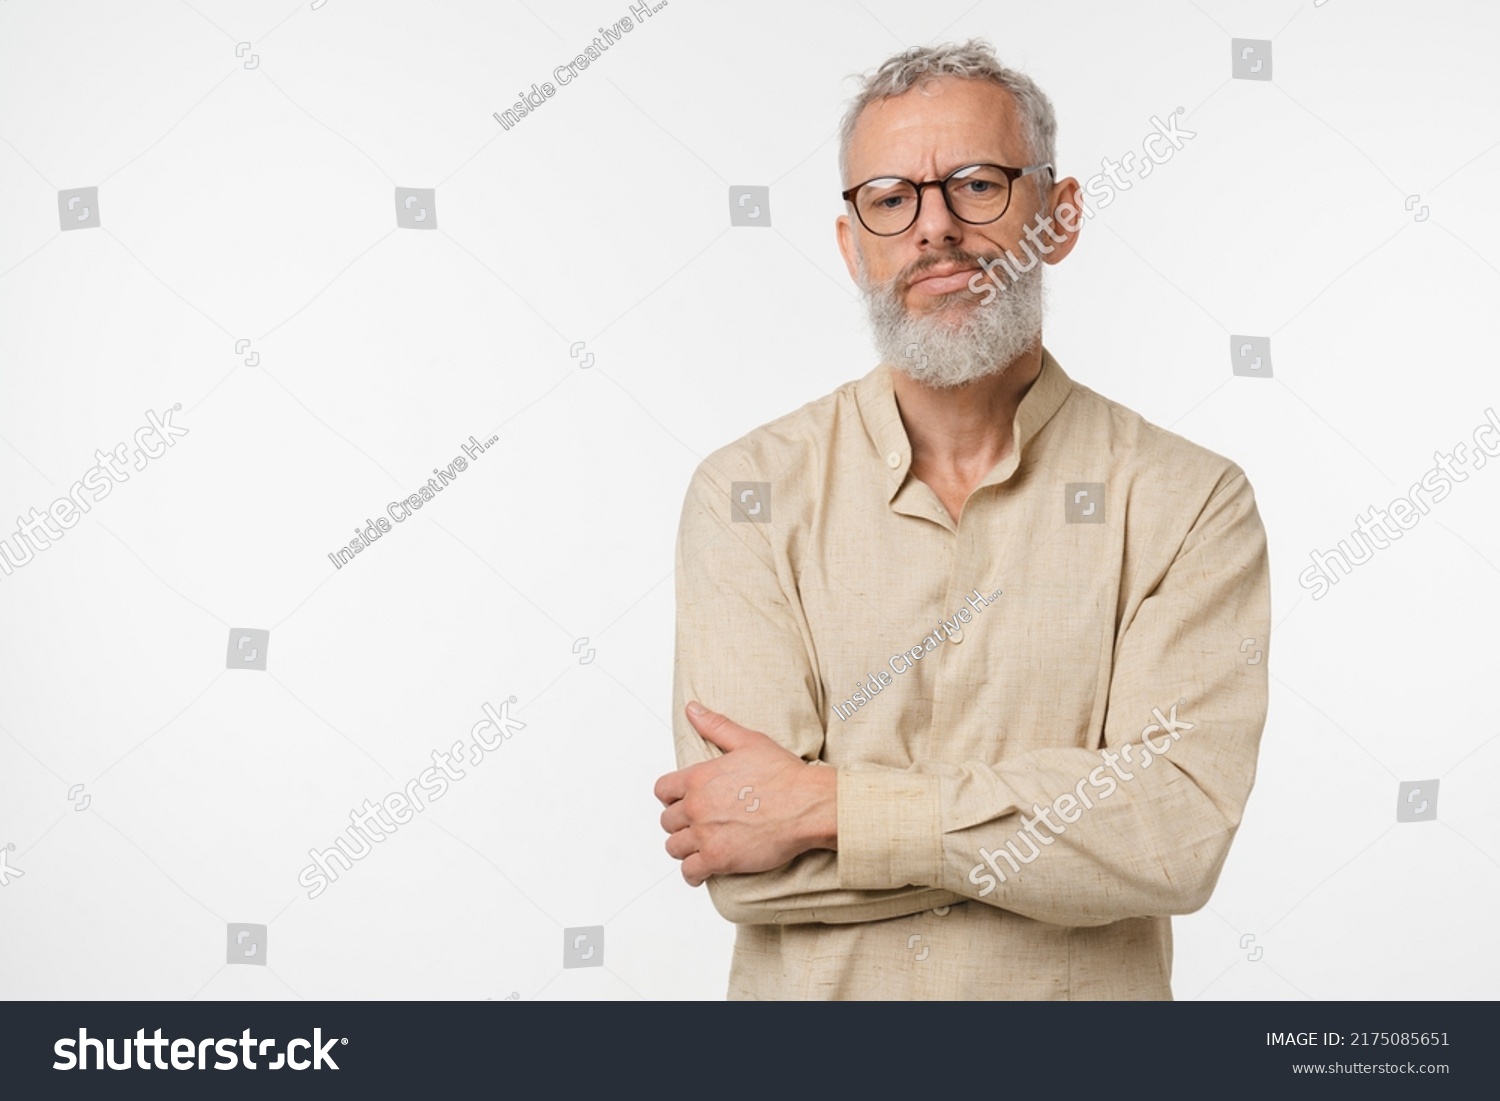 Sad offended disappointed caucasian mature middle-aged man in beige shirt and glasses feeling depression guilt negative emotions isolated in white background #2175085651